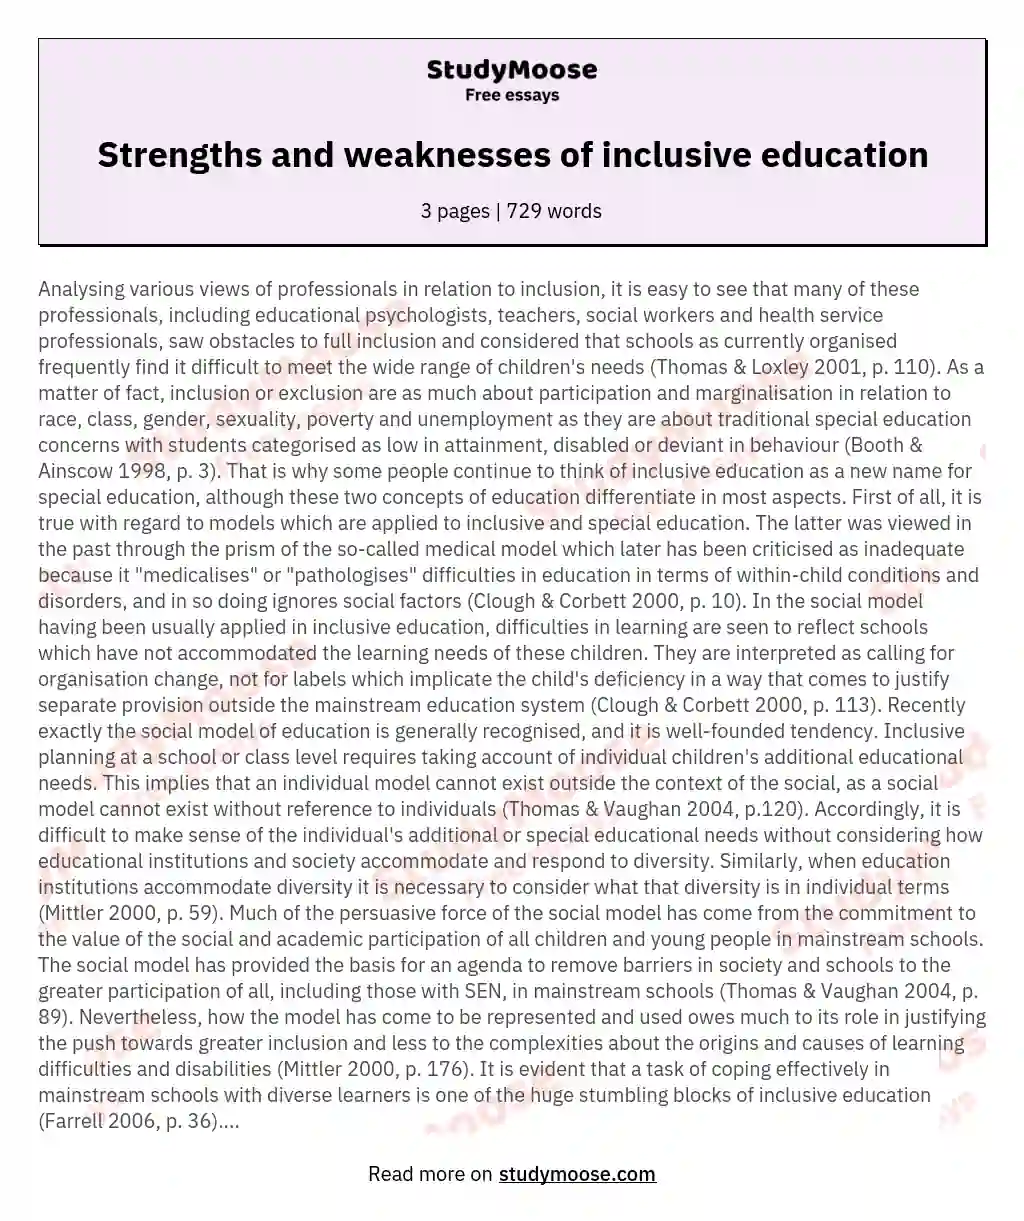 Strengths and weaknesses of inclusive education essay